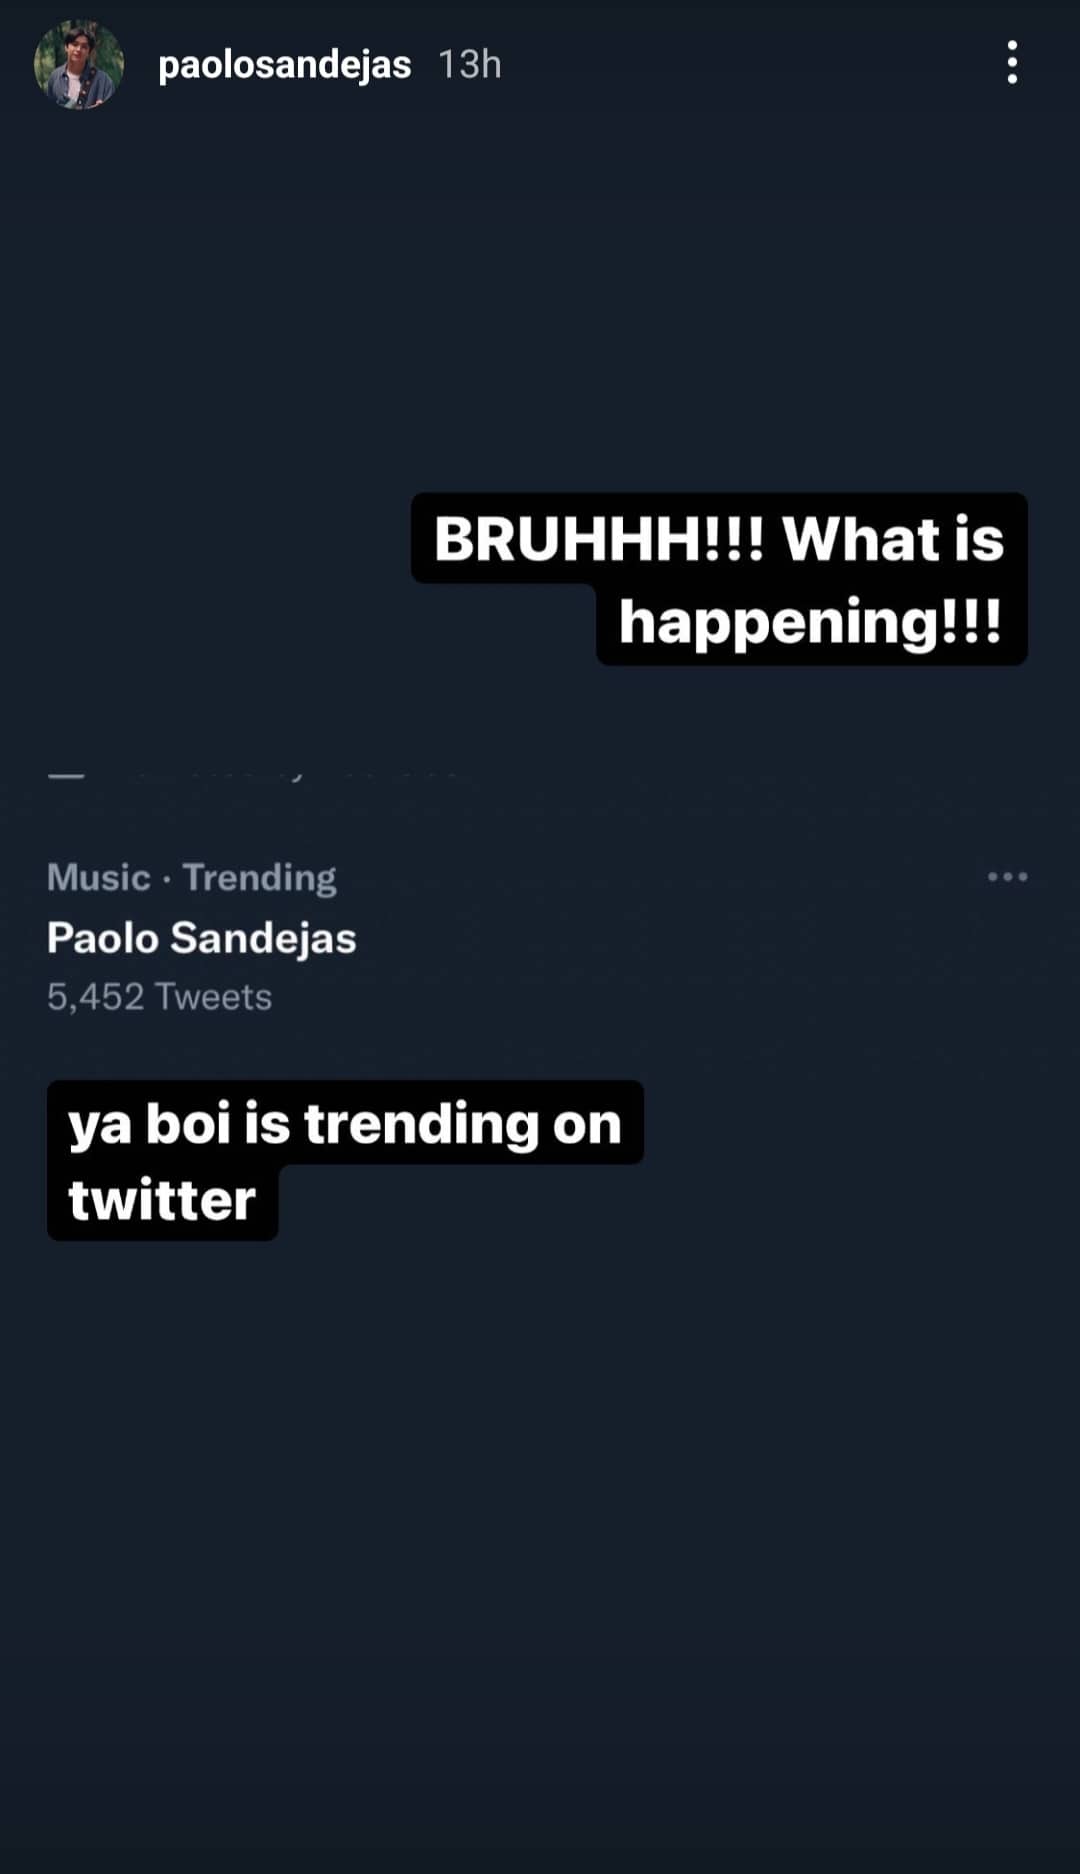 Paolo Sandejas trends on Twitter after his song 'Sorry' is played by BTS' V in a vlog